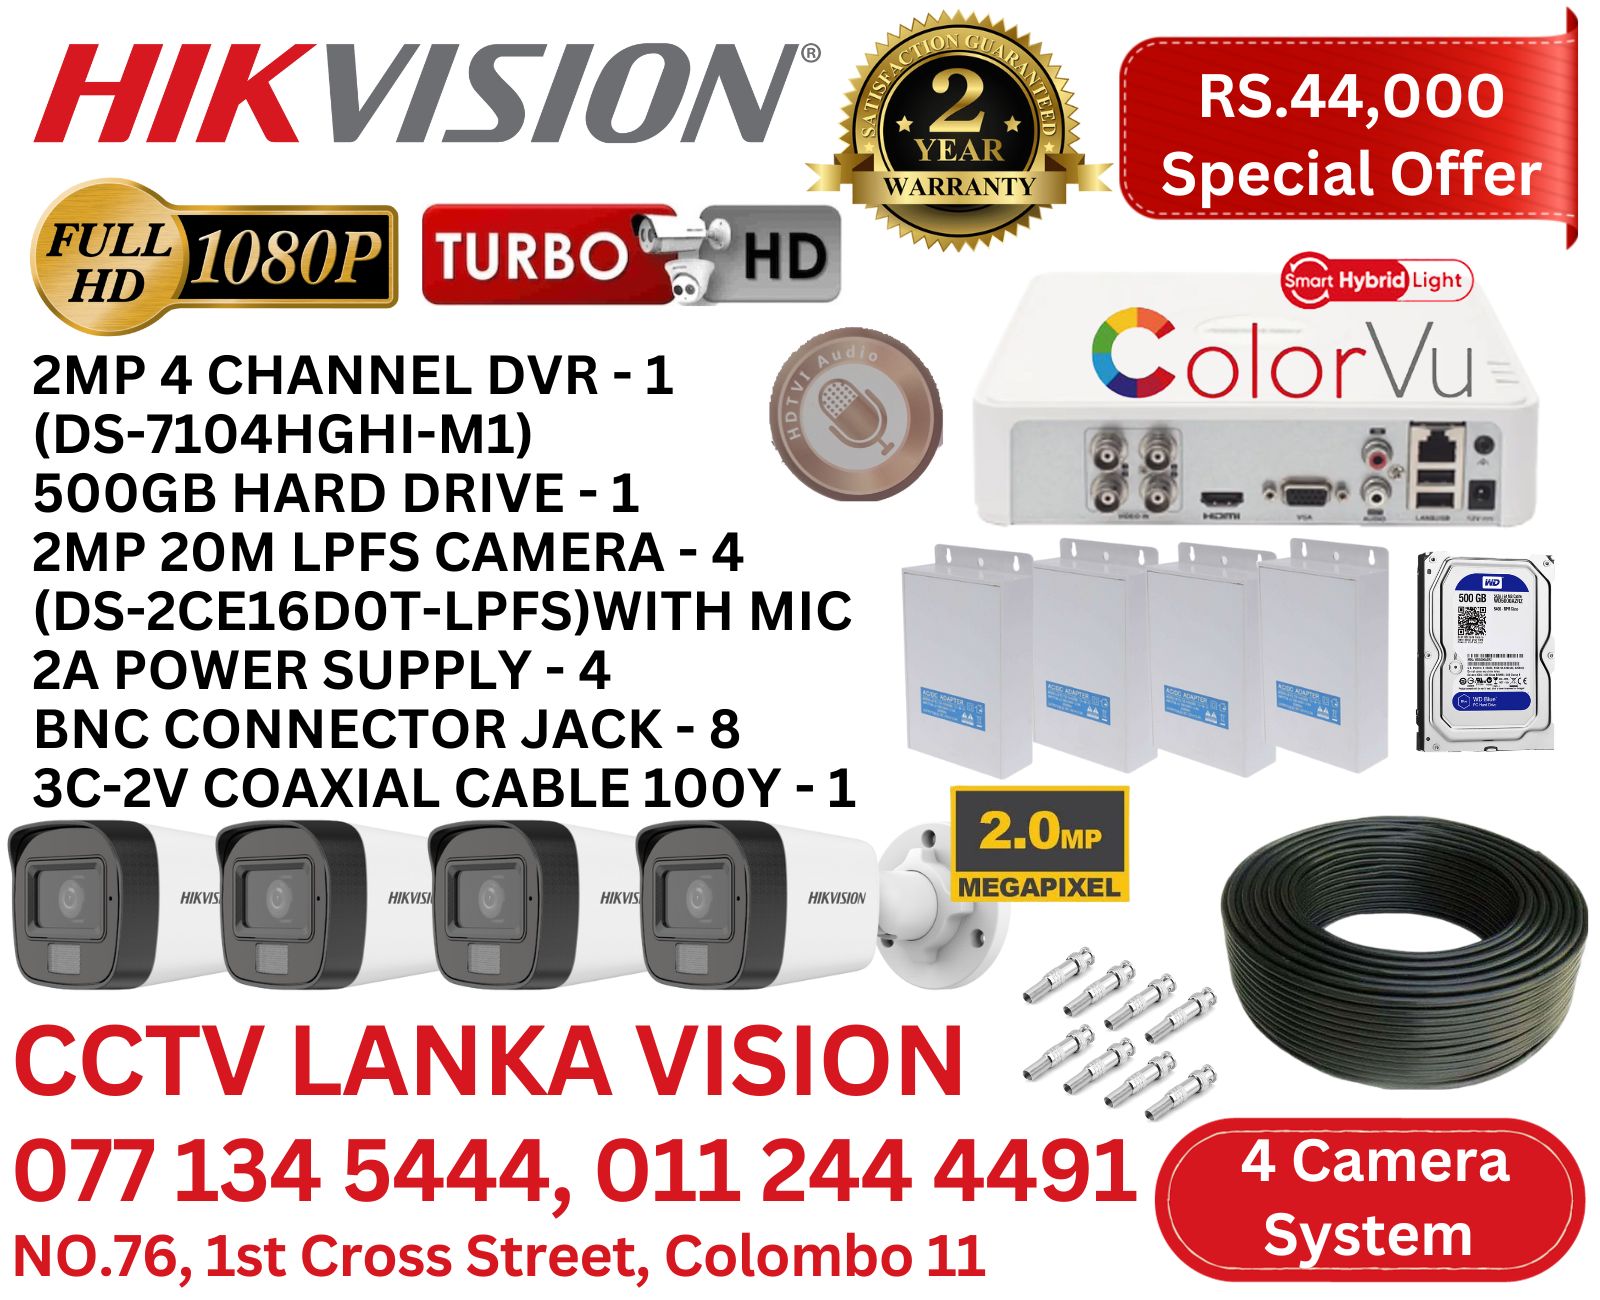 HIKVISION FULL COLOUR NIGHT VISION 4 CHANNEL CCTV CAMERA SYSTEM